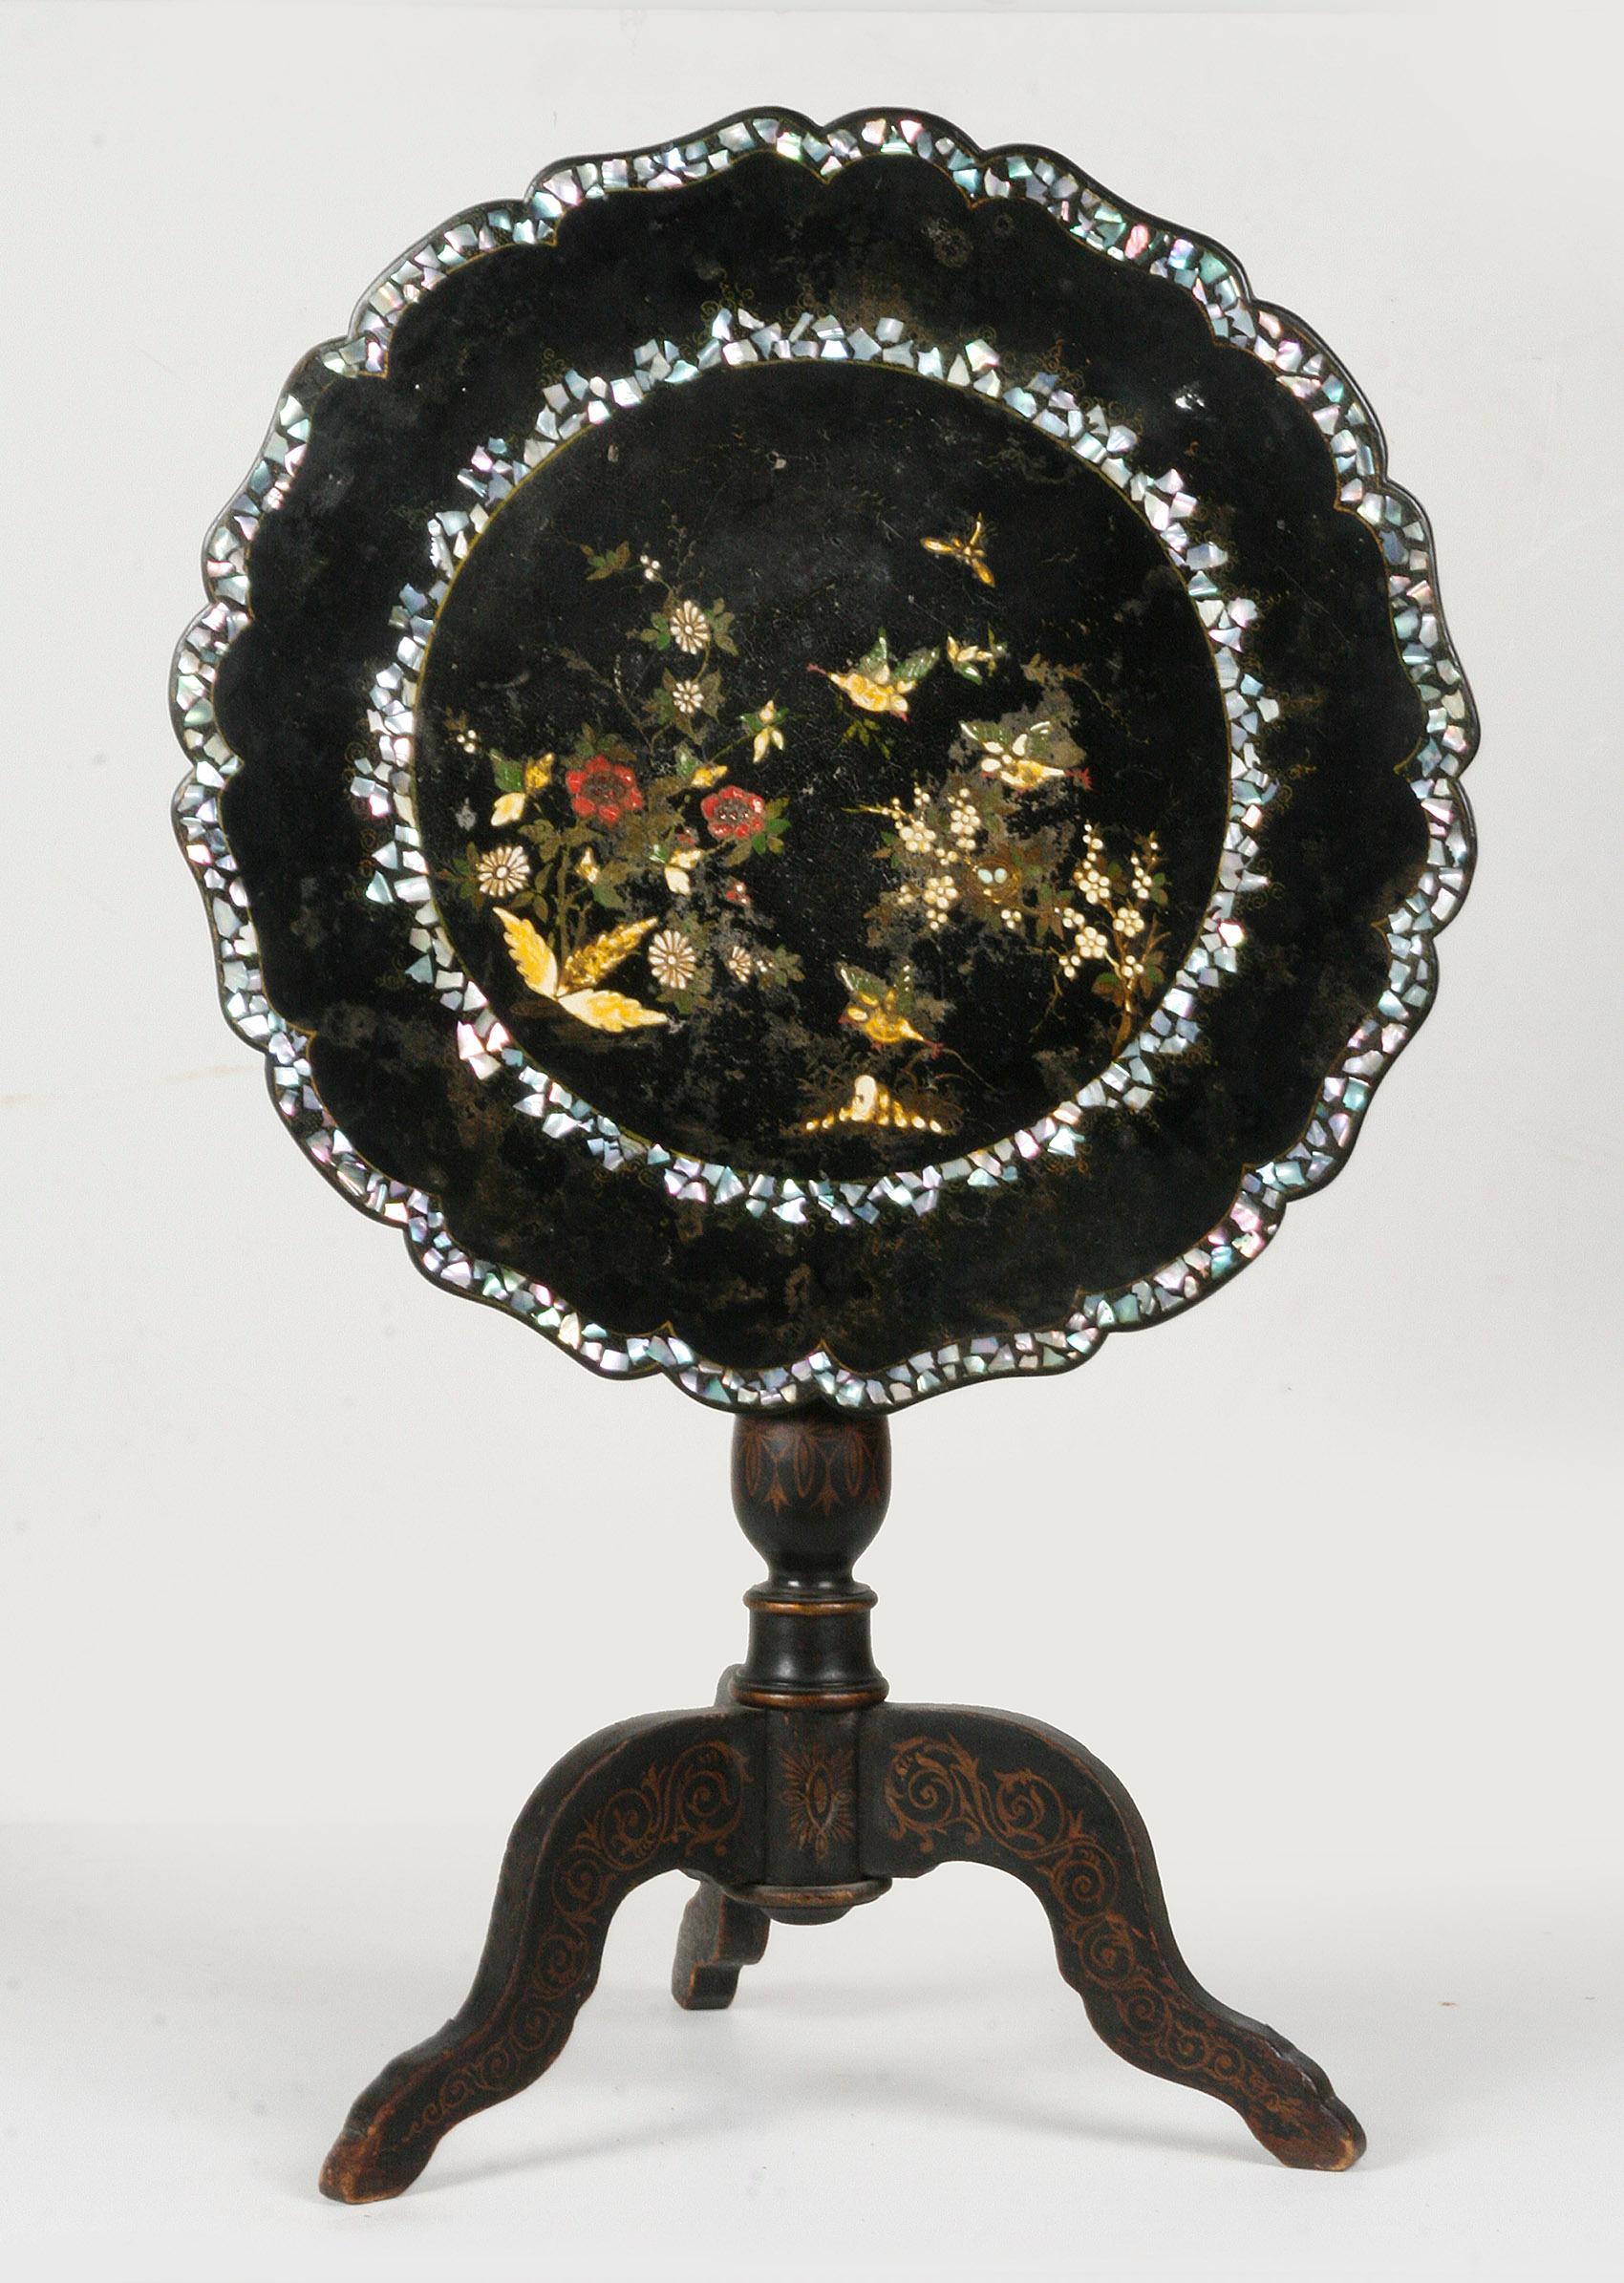 An antique French tilt-top table from the Napoleon III period.
The table is made of wood (a softwood type), with lacquer work, paintwork and inlays made of mother of pearl. The chassis is a tripod.
The tabletop tilts. This mechanism works